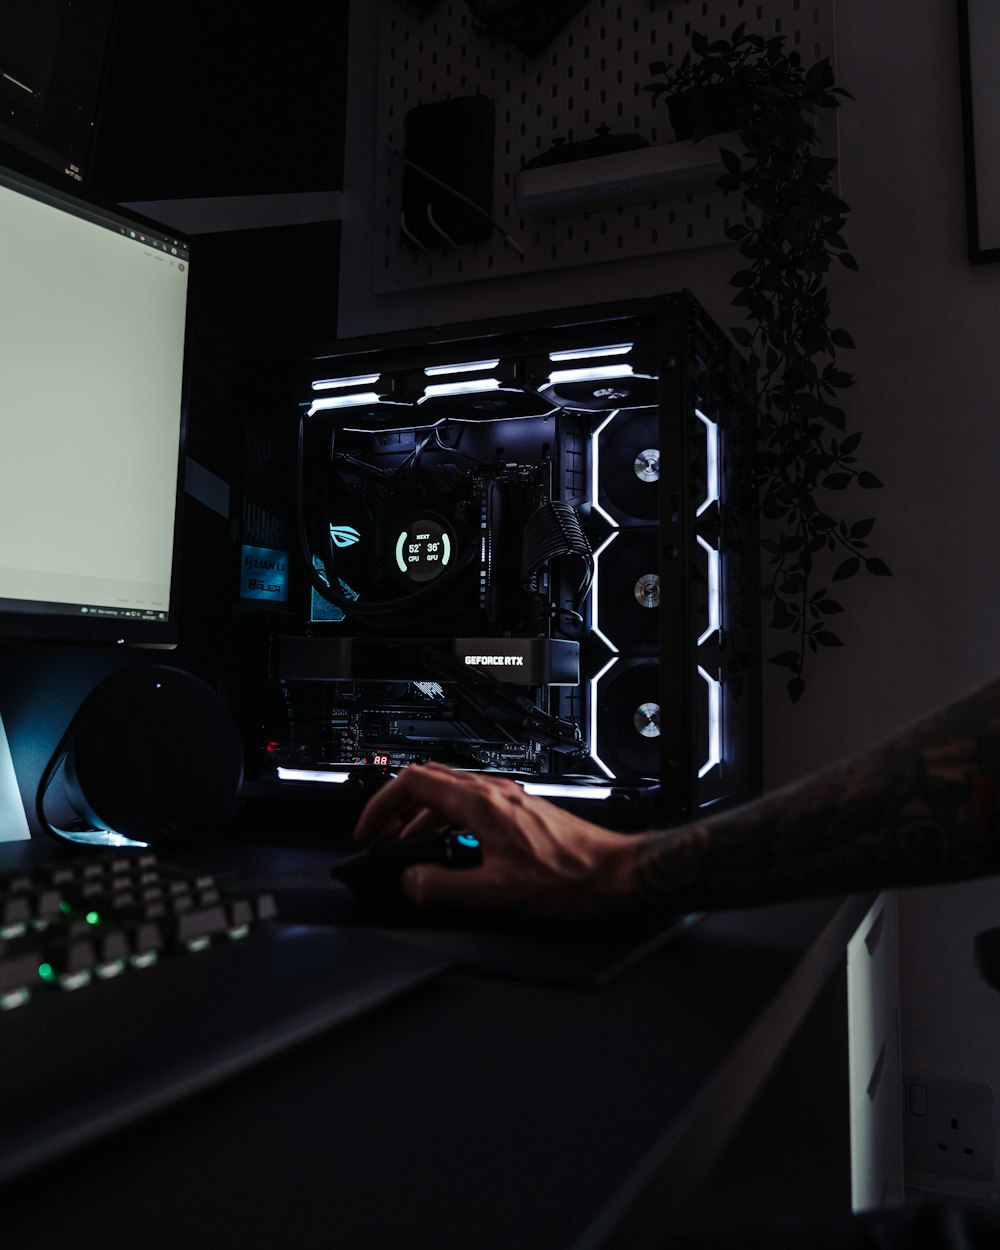 750+ Gaming Pc Pictures  Download Free Images on Unsplash